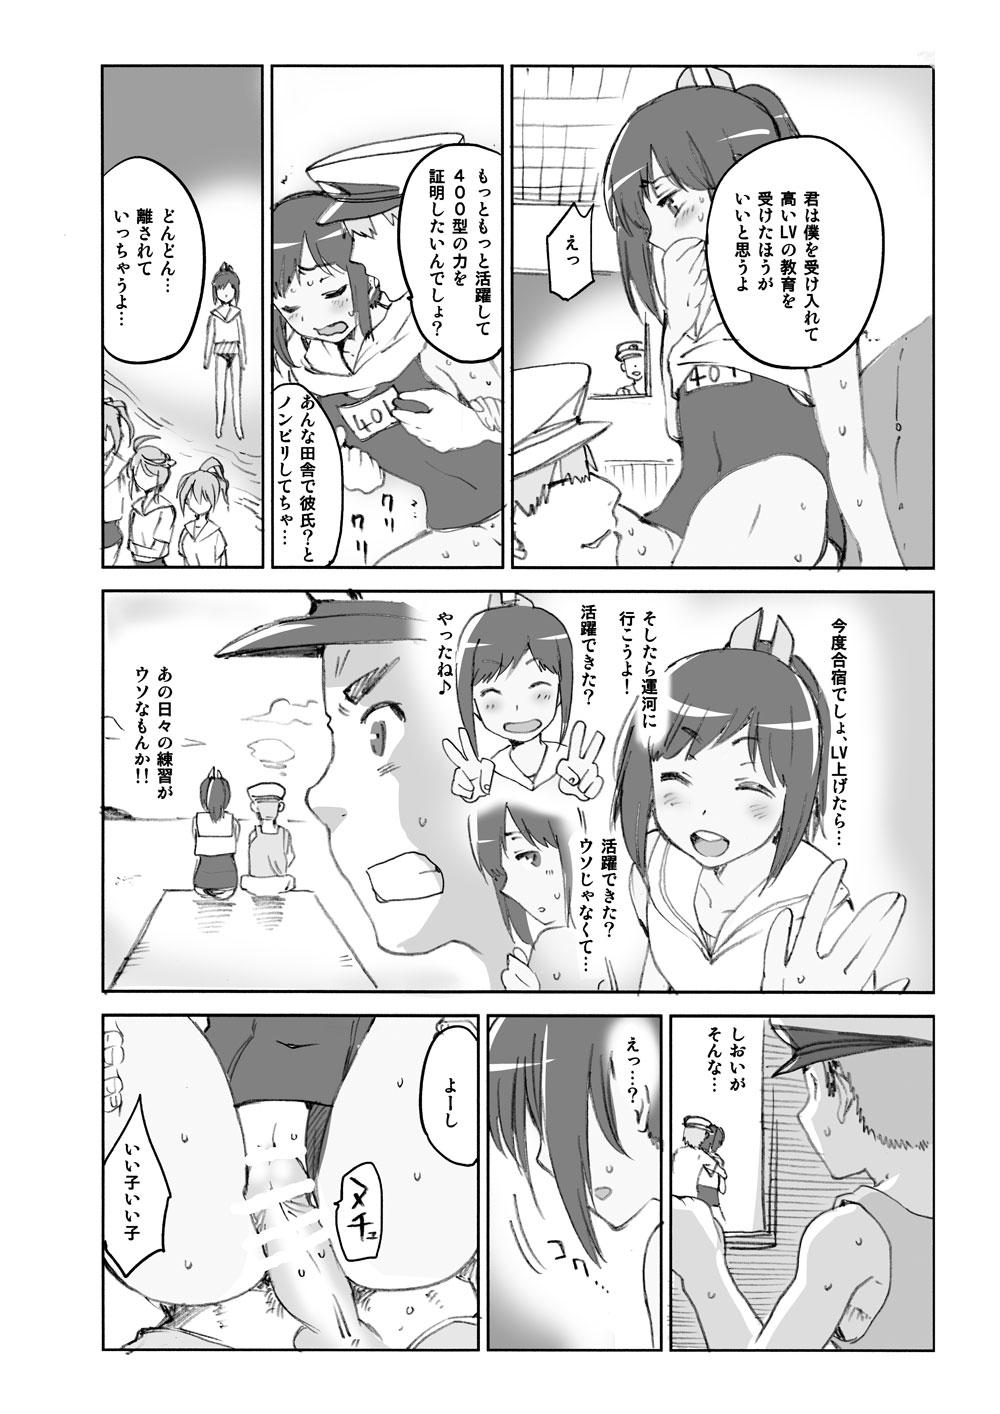 COMIC1☆9 Omake - Curry to Bouhatei 3